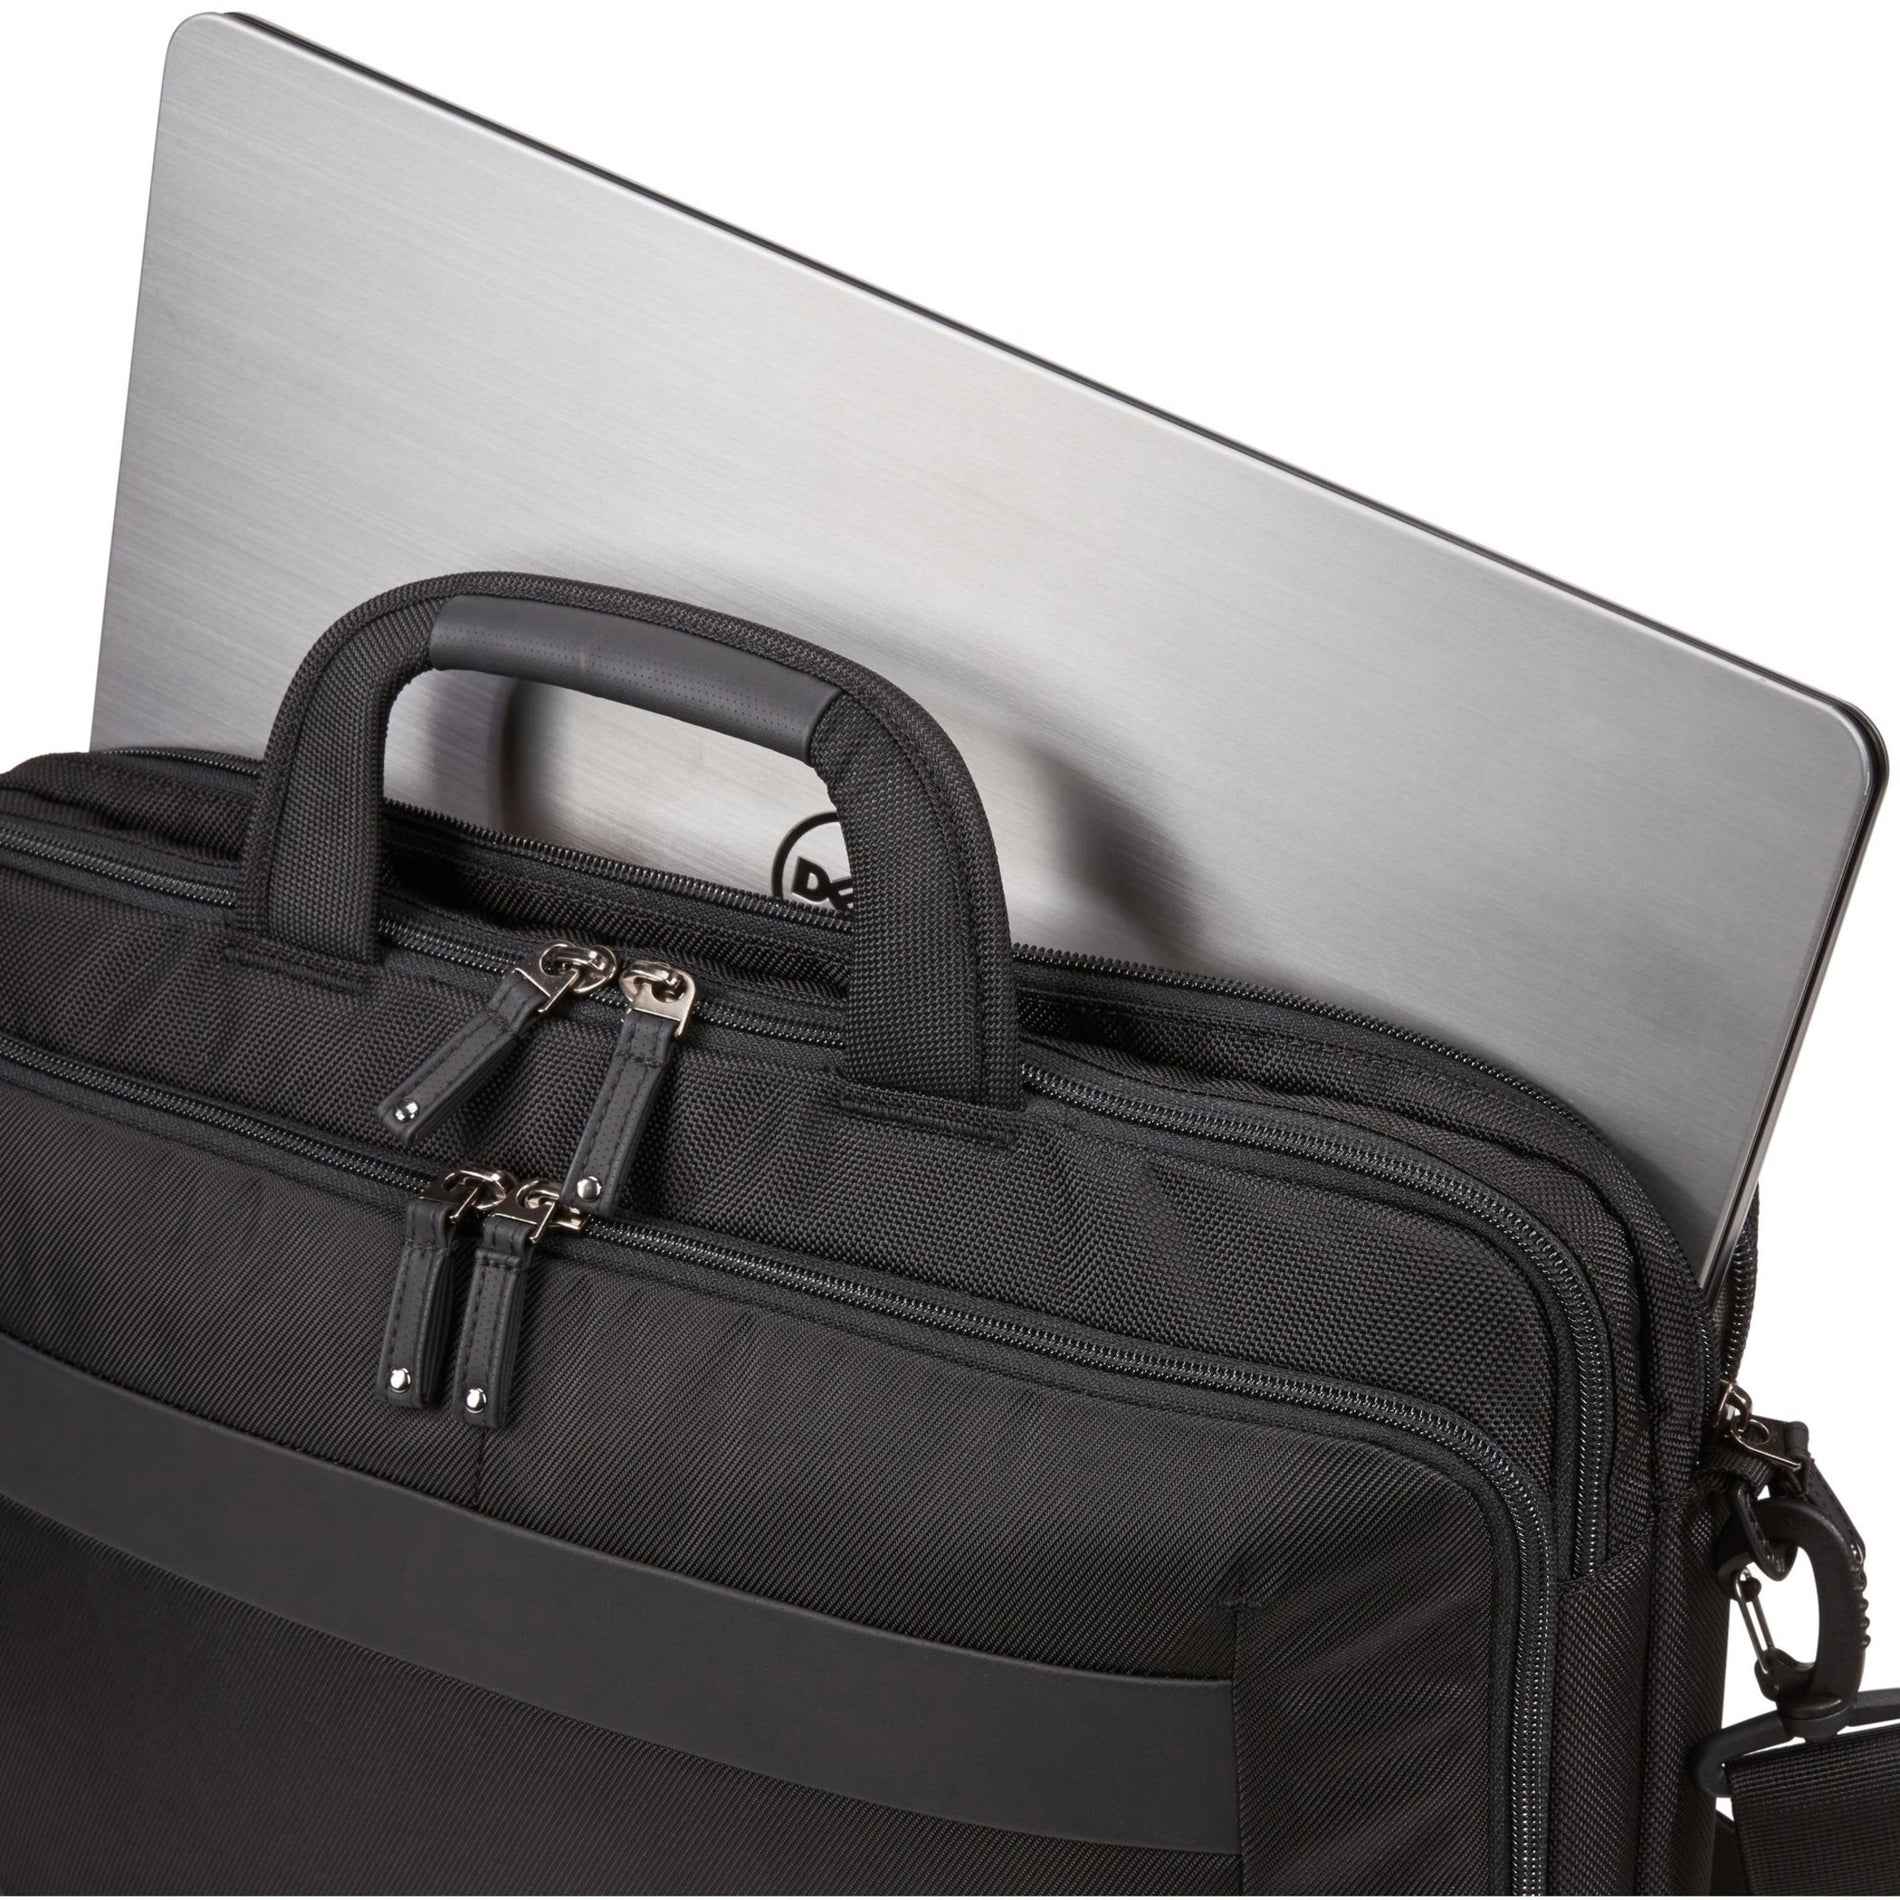 Case Logic 3204198 Notion 15.6in Briefcase, Tablet PC, Accessories, Notebook, Black Nylon